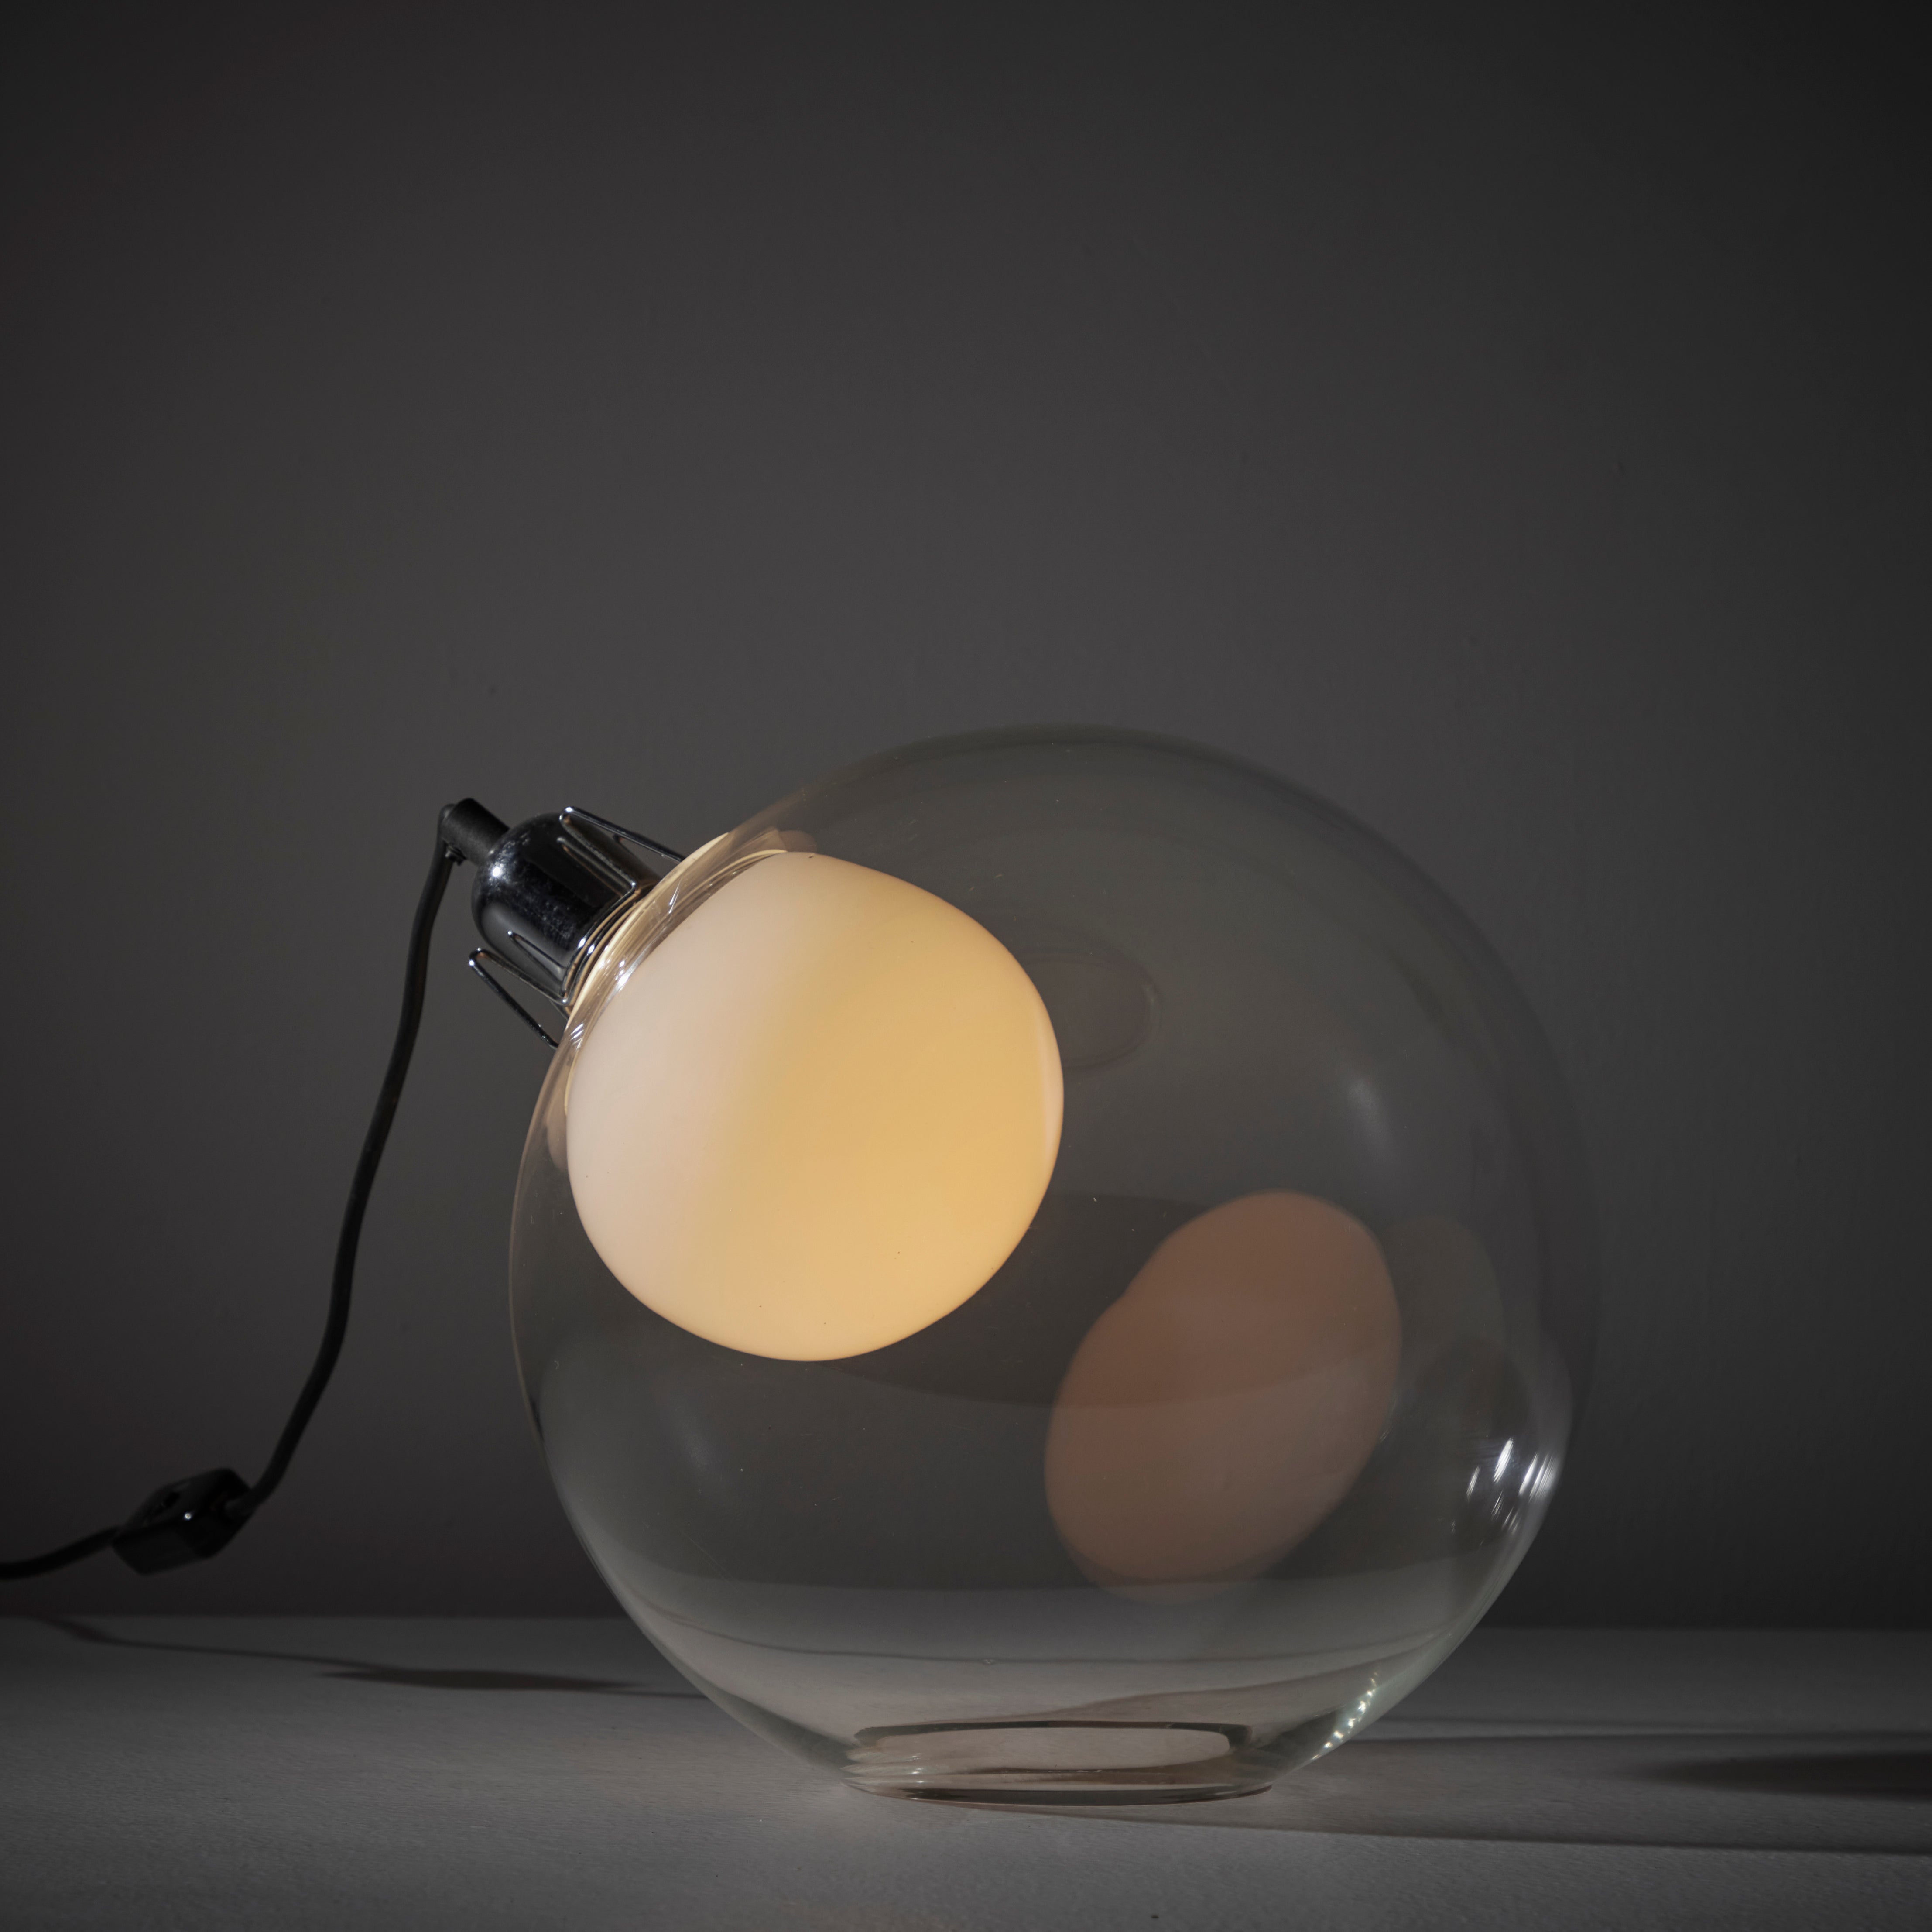 'Sona' Table Lamp by Carlo Nason for Luneform. Designed and manufactured in Italy, in 1973. Spherical transparent table lamp with inner, organically blown, milk glass diffuser and chrome detailing. The table lamp holds one E27 bulb, adapted for the